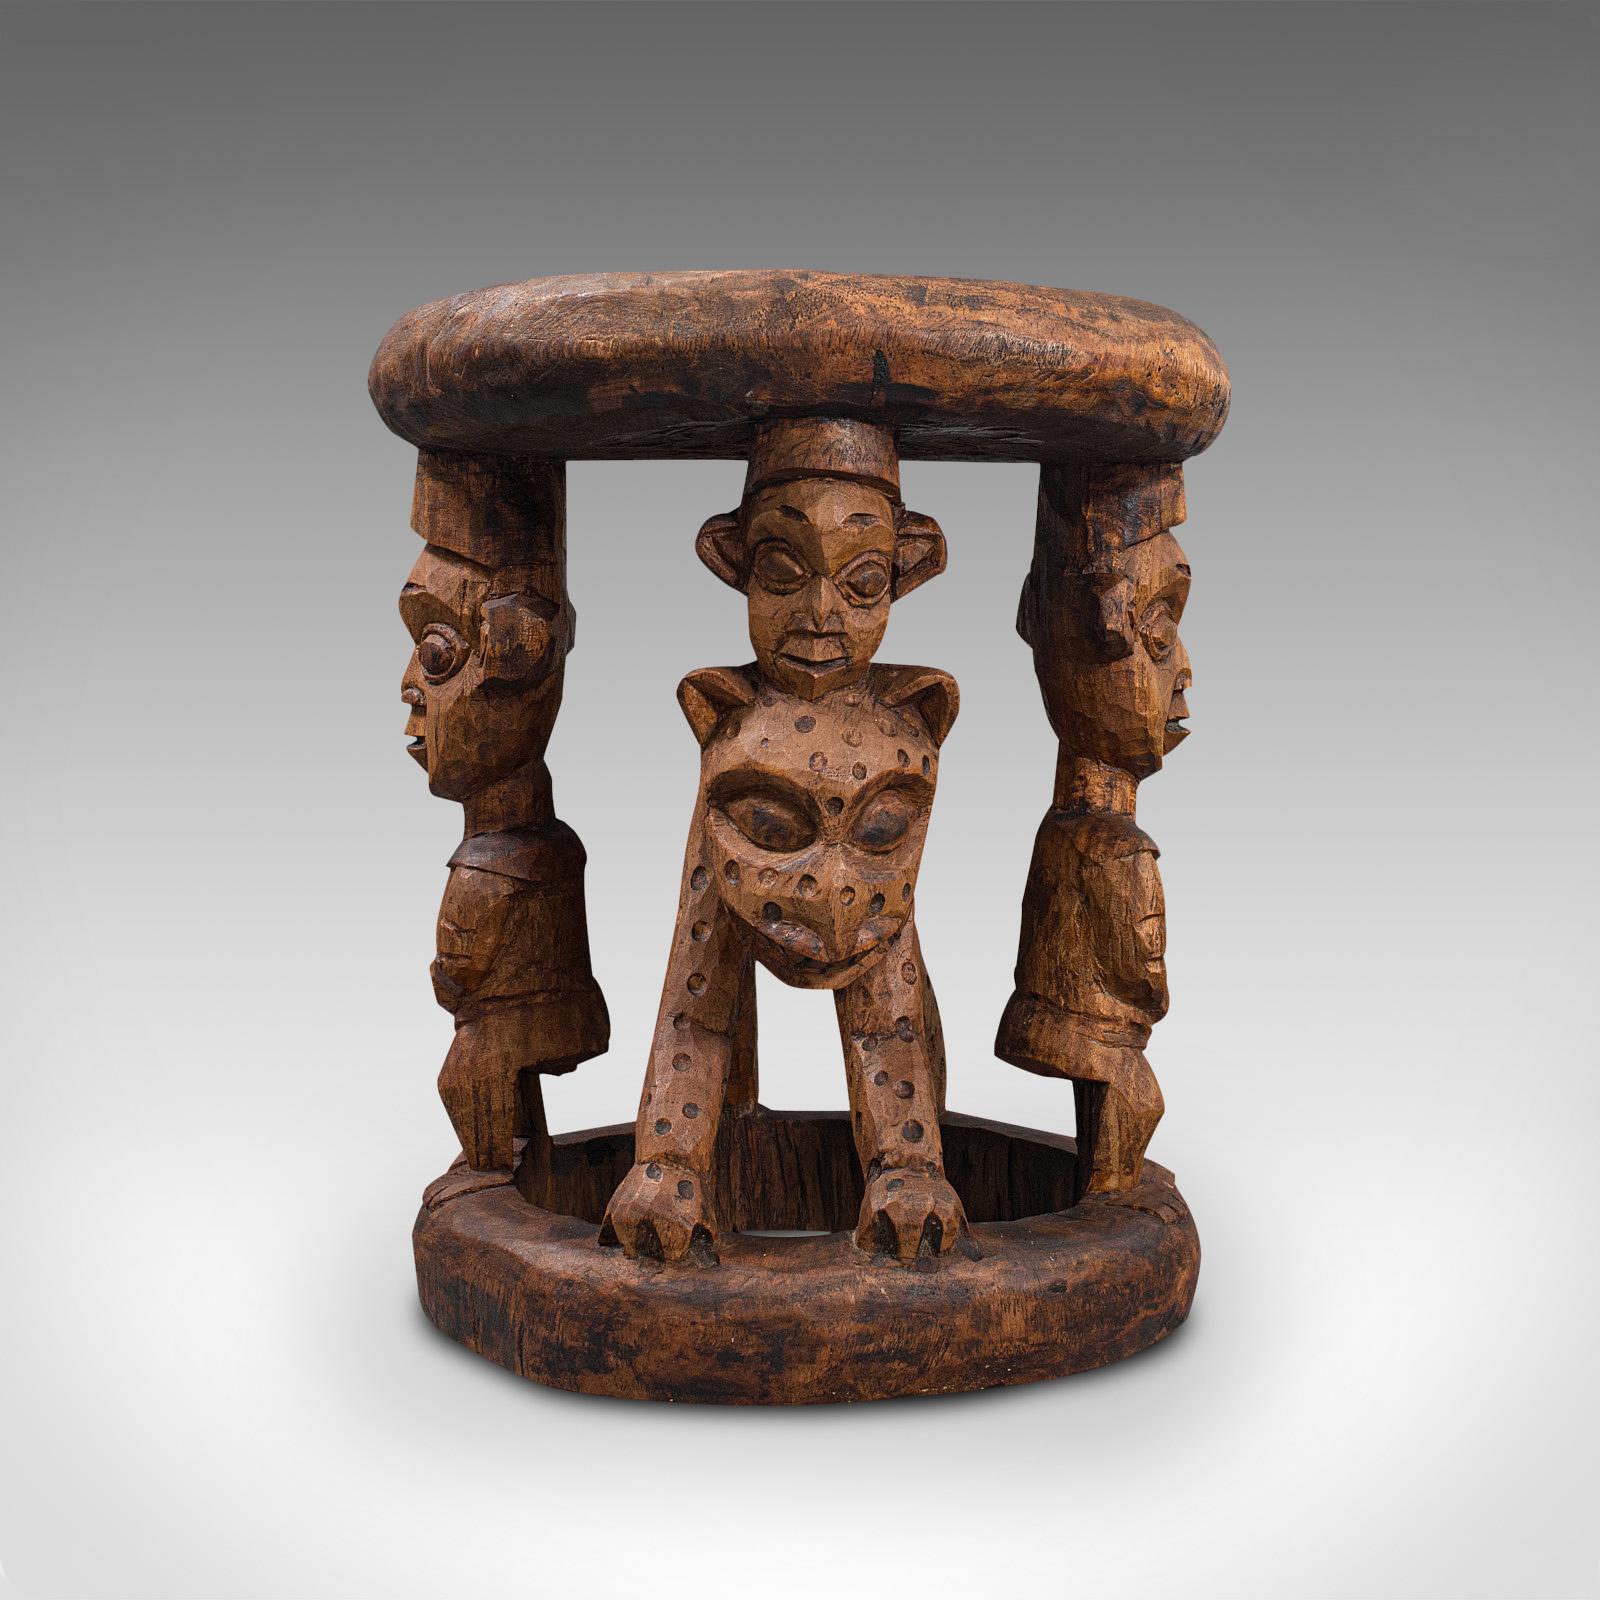 This is an antique ceremonial Yoruba chief's stool. A West African, Benin Kingdom hardwood side or lamp table, dating to the late 19th century, circa 1900.

Striking West African tribal craftsmanship
Displaying a desirable aged patina - split to